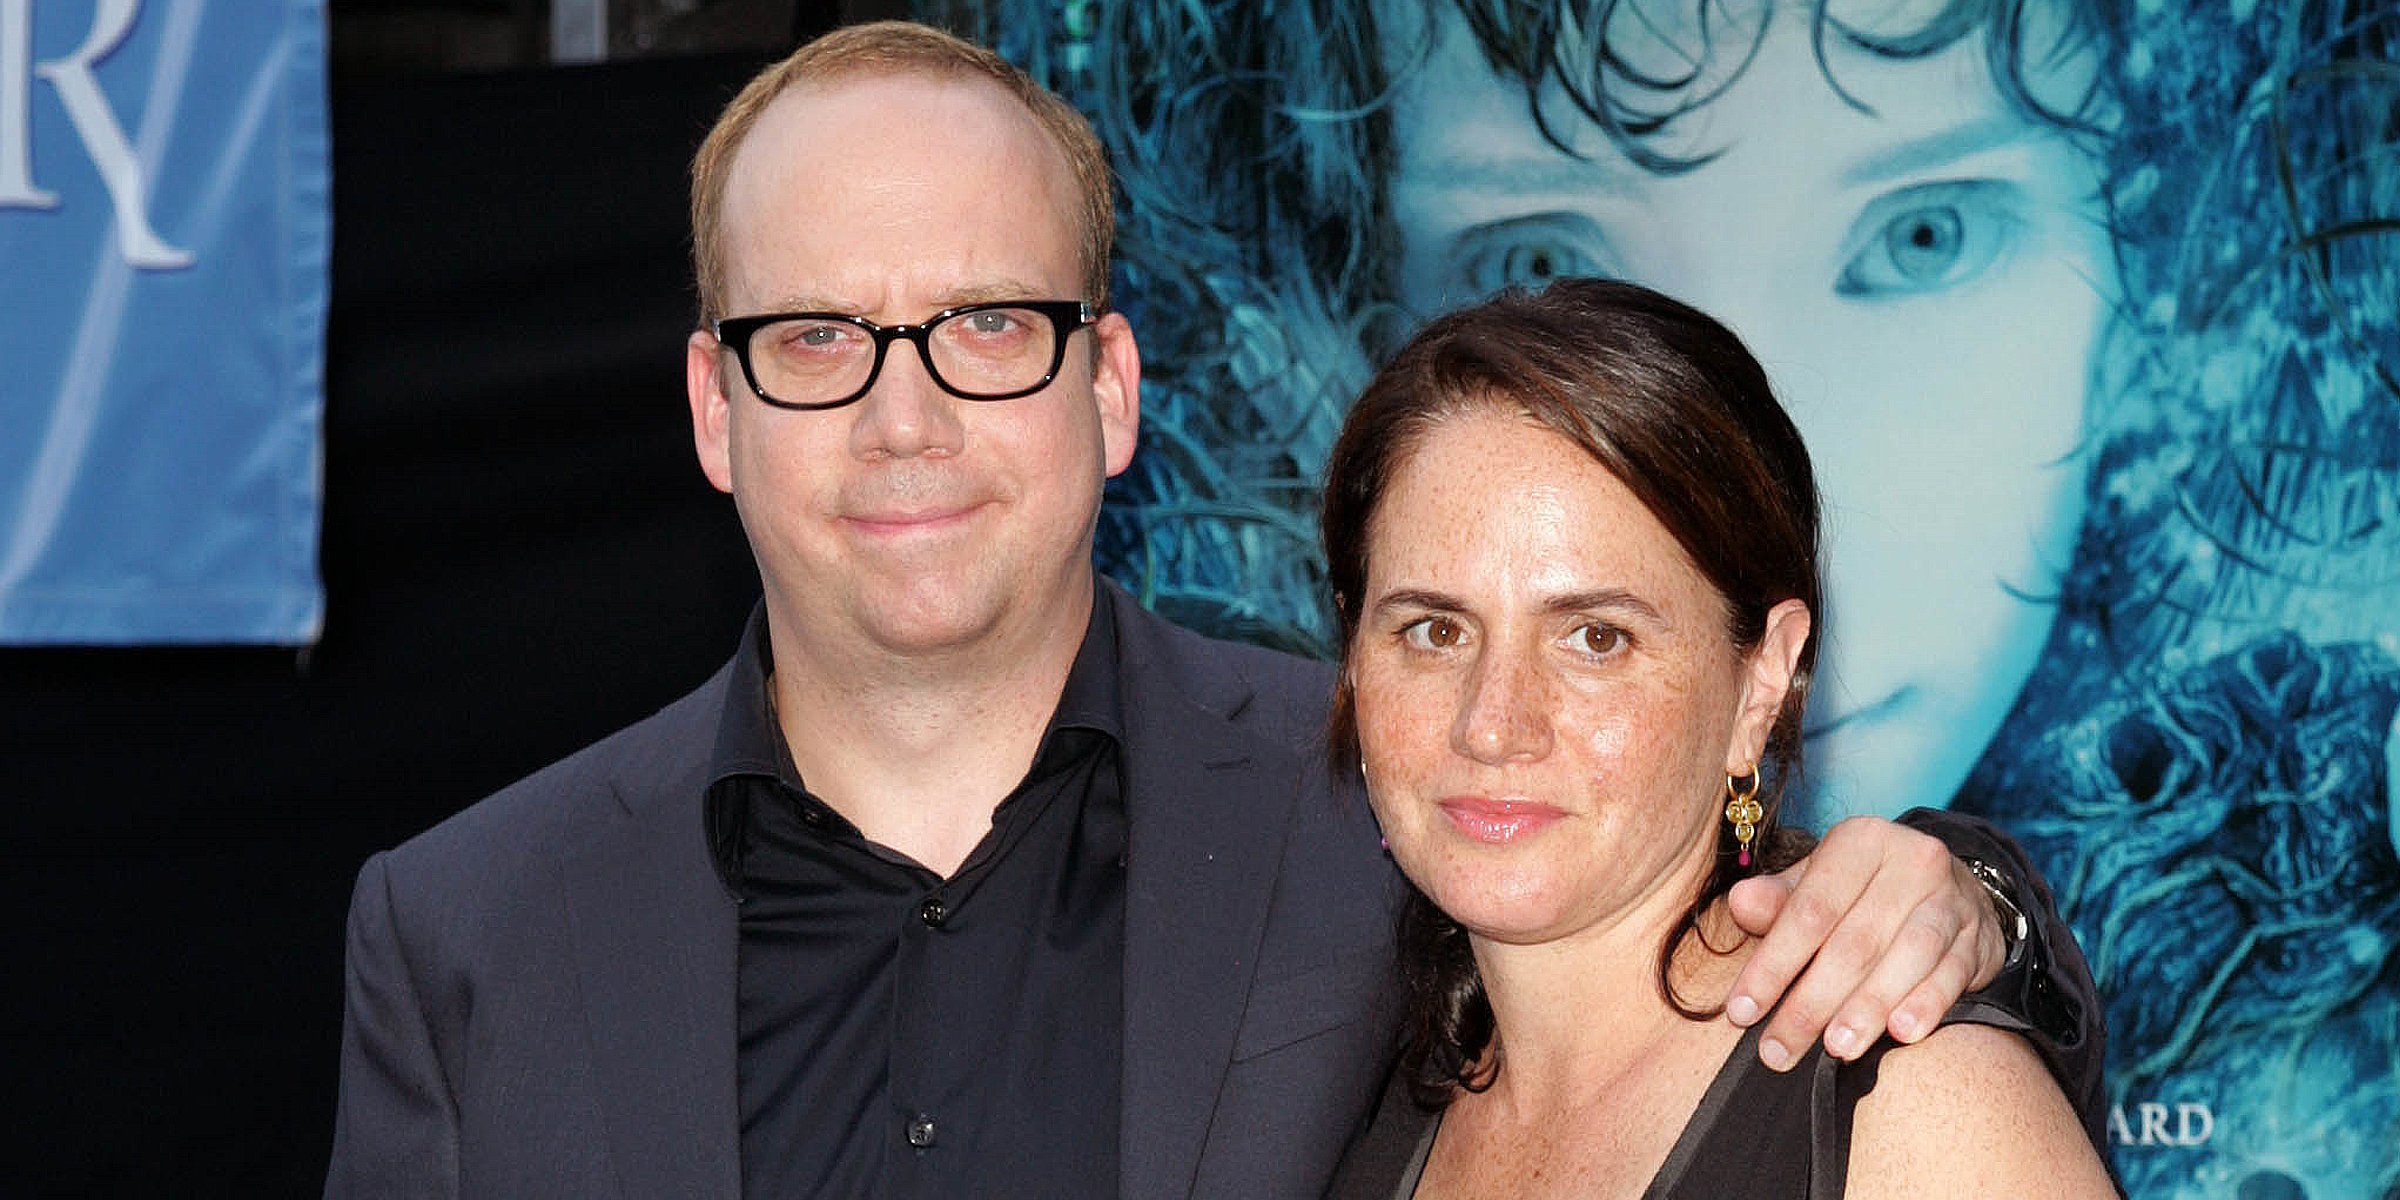 Who Is Neve Campbell's Husband? The 'Scream' Star's Relationship with